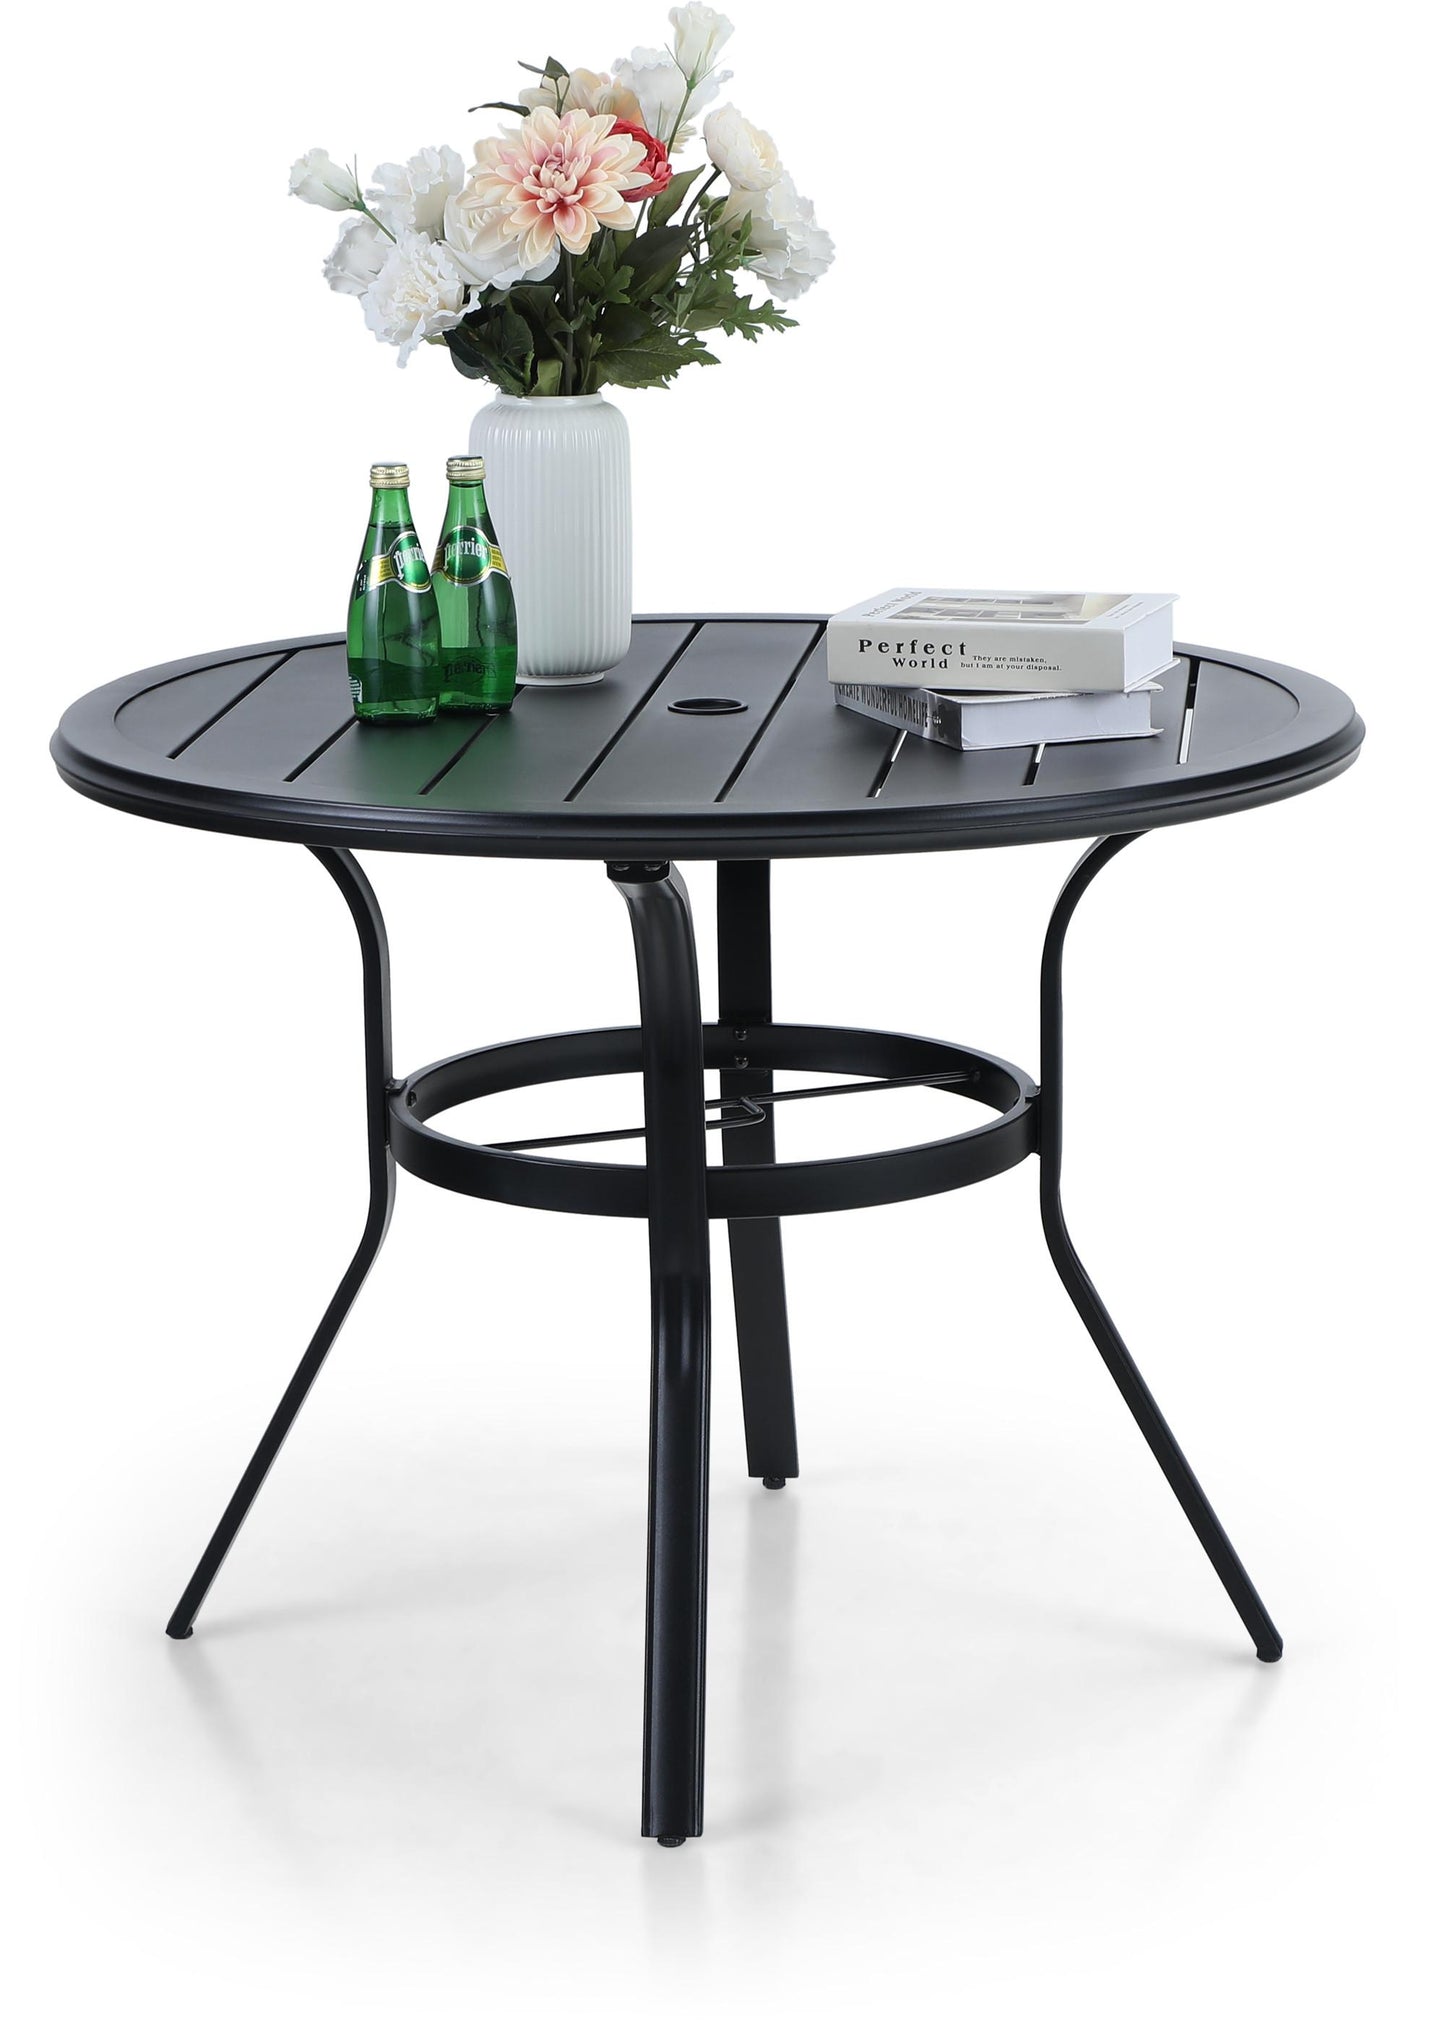 Sophia & William Outdoor Metal Round Dining Table for 4 Chairs